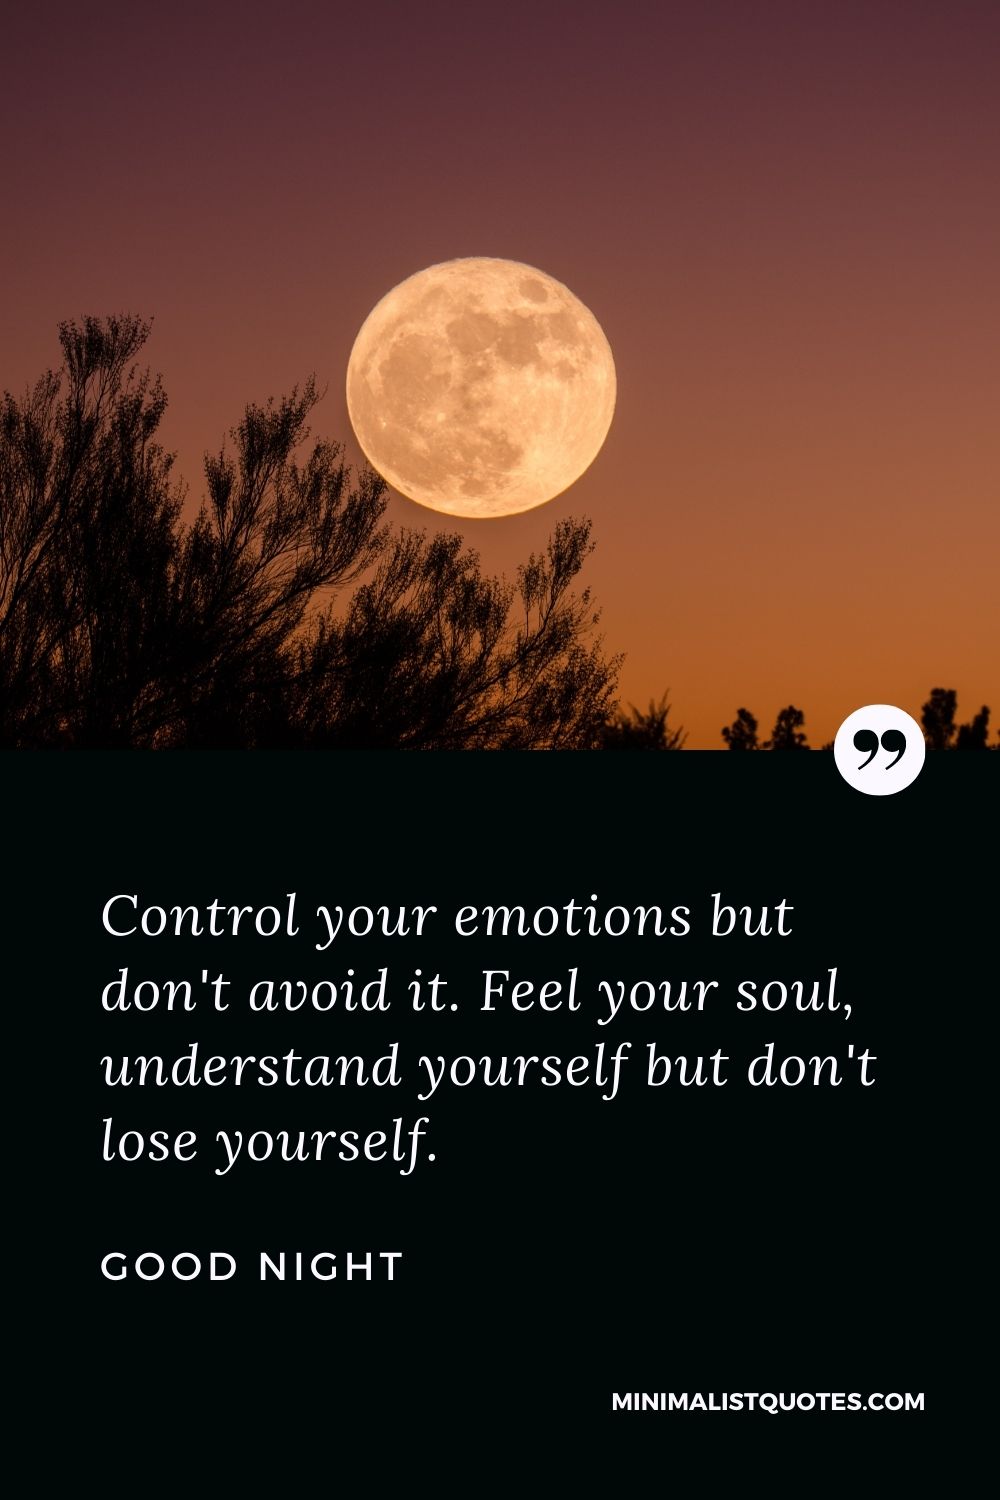 Good Night Wishes - Control your emotions but don't avoid it. Feel your soul, understand yourself but don't lose yourself.